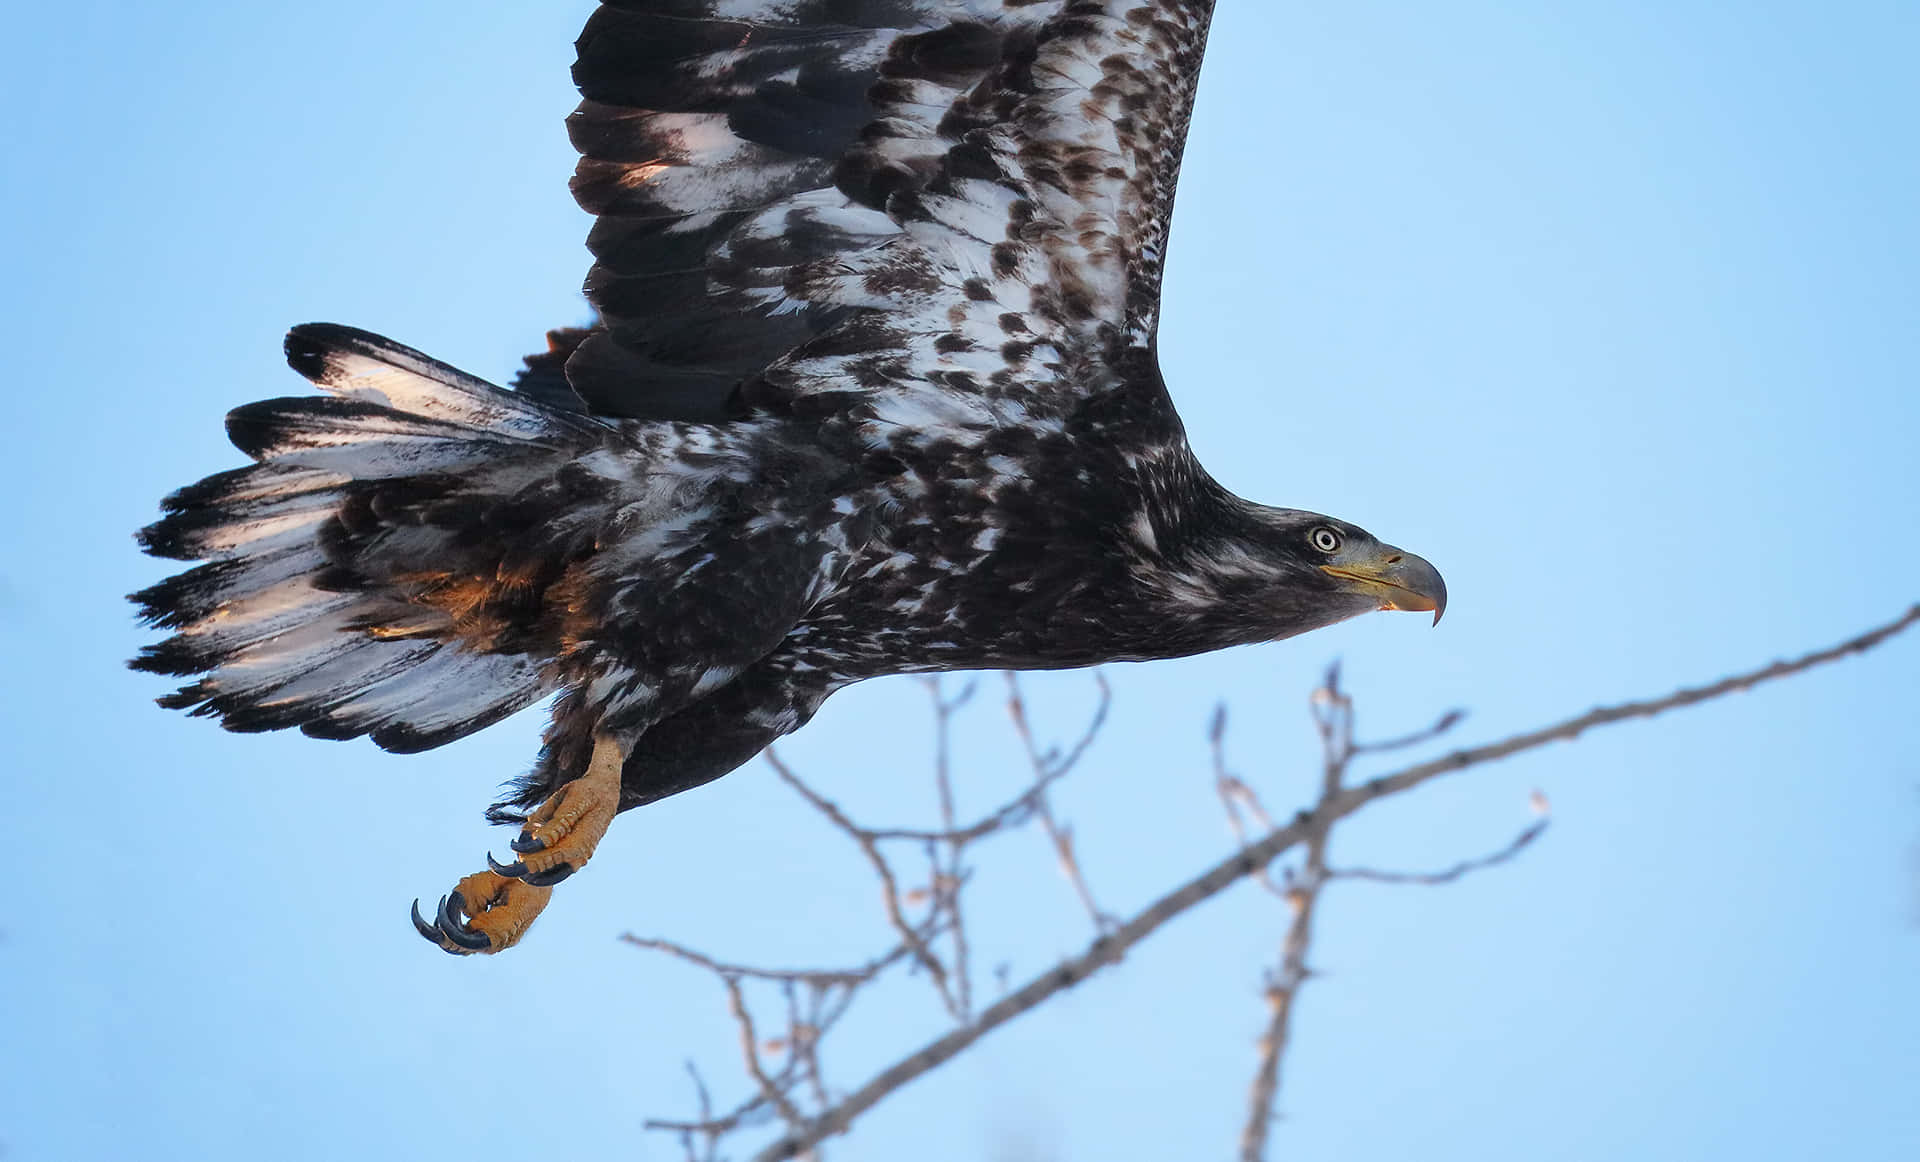 Take Flight - a young eagle soars majestically in pristine skies